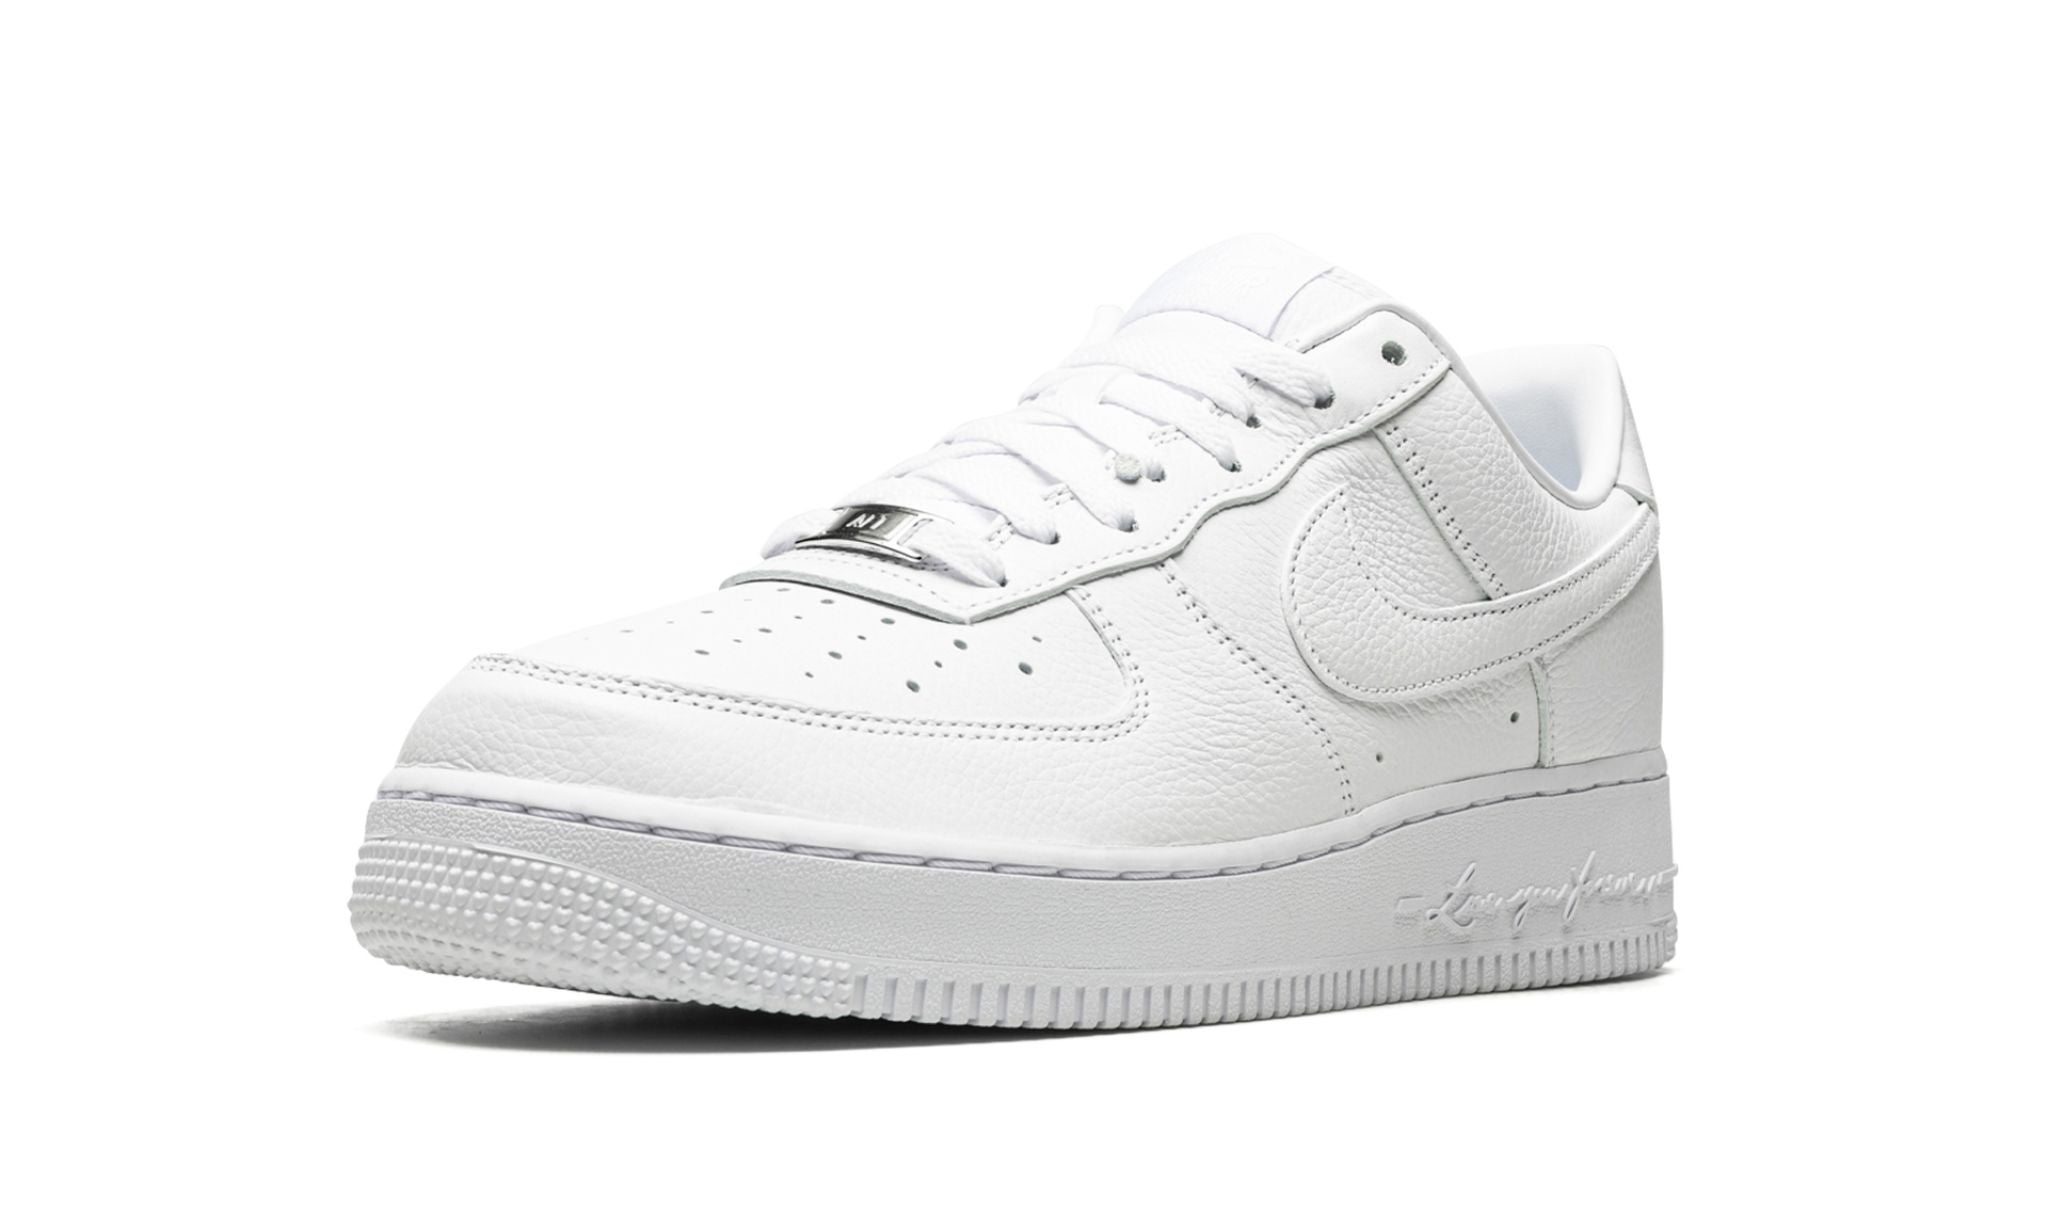 Air Force 1 Low "Drake NOCTA - Certified Lover Boy"